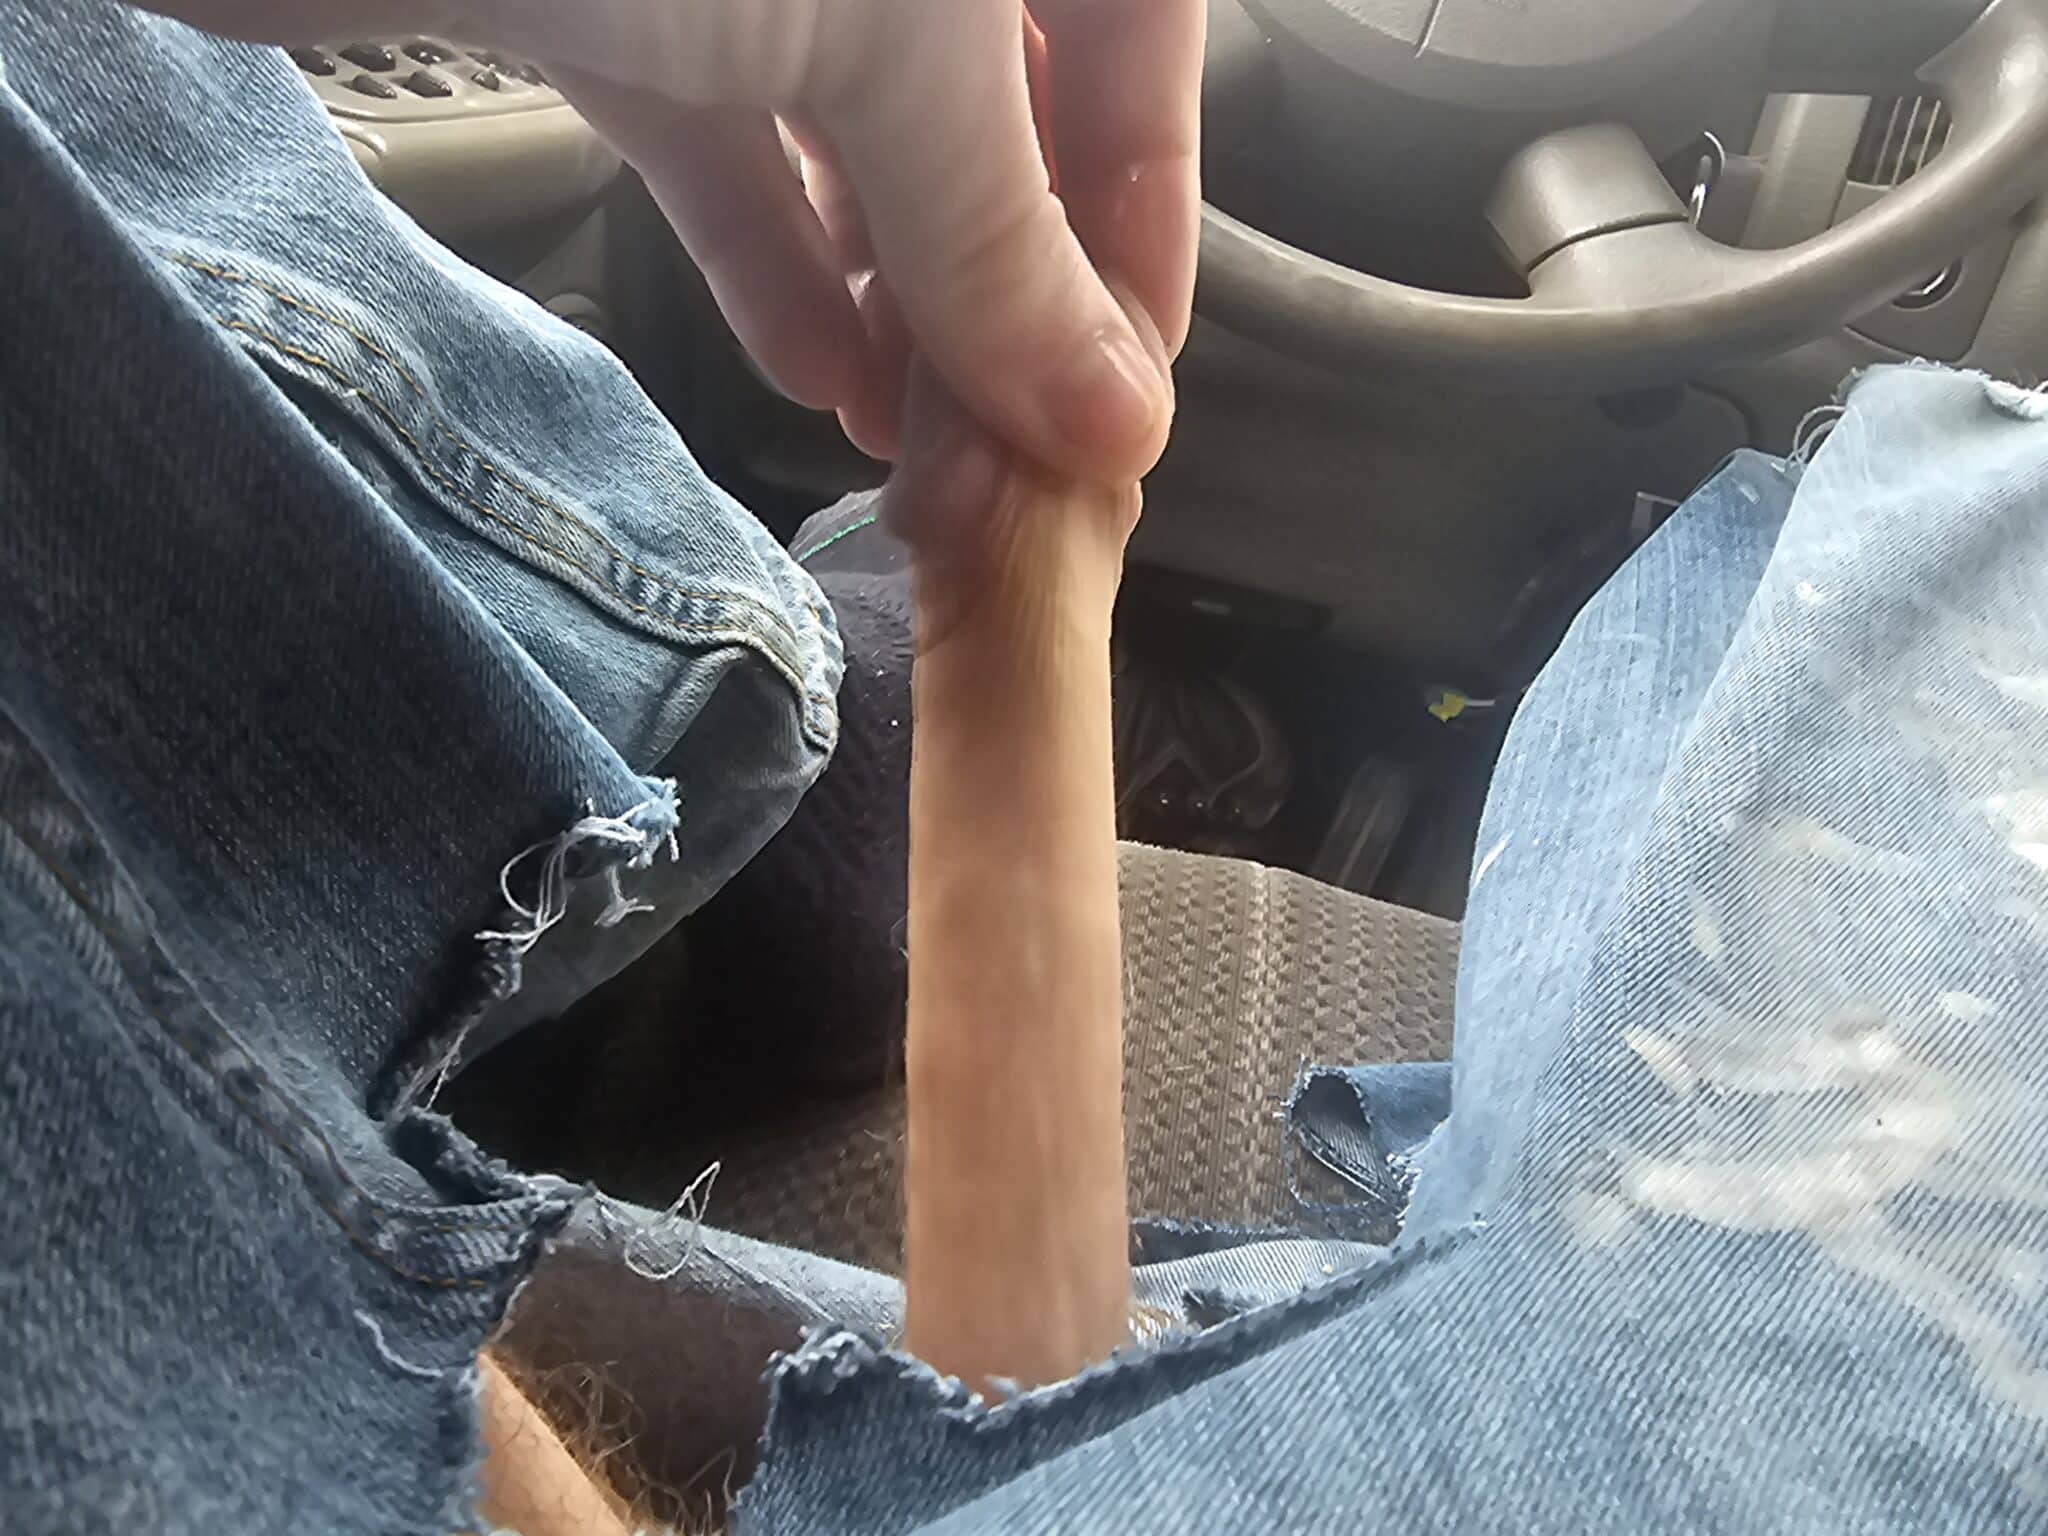 Dick in public real nudity